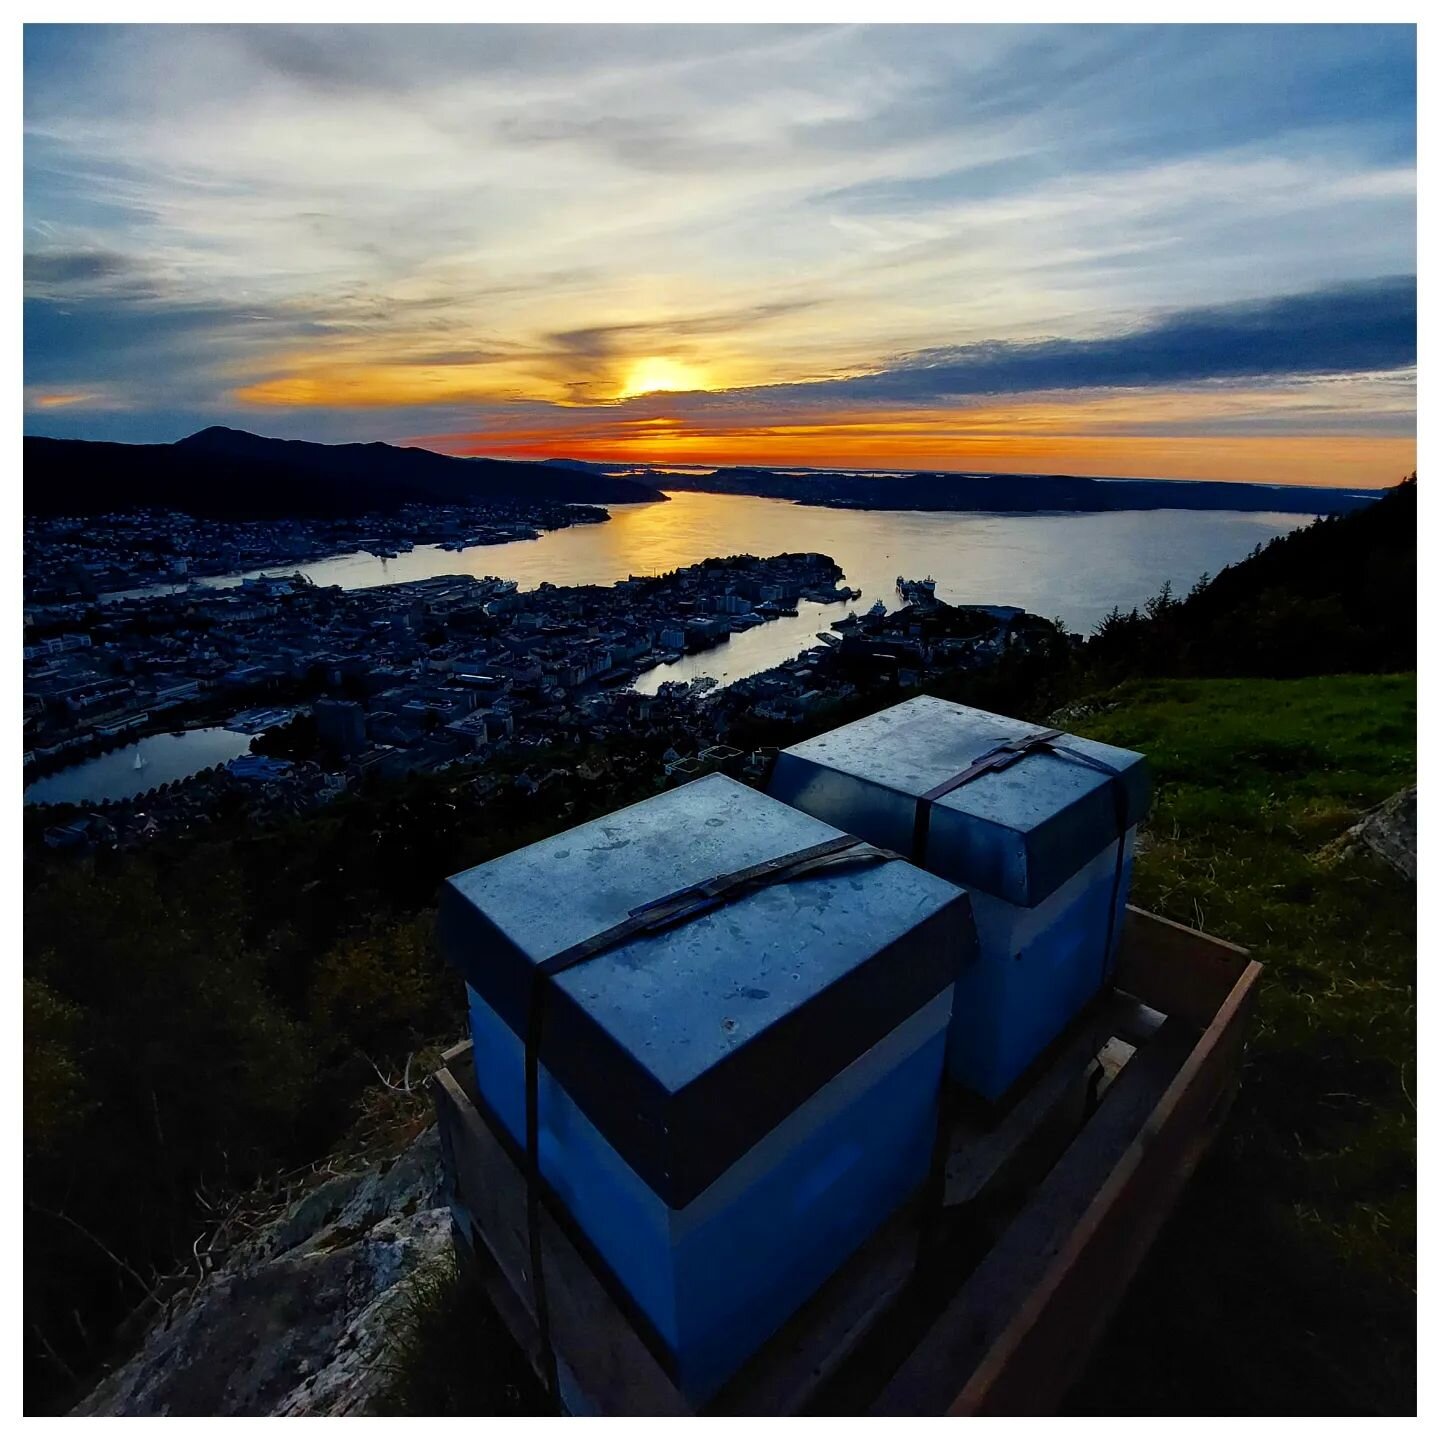 18&deg;C ☀️
Sunset in the @floibanen beeyard 312m above Bergen 🐝
The honey is harvested and the season is coming to an end.
.
.
.
#beekeeper #beekeeping&nbsp; #rooftopbeekeeping #backyardbeekeeping #urbanbeekeeping #beehive 
#honey #apiary #apicultu